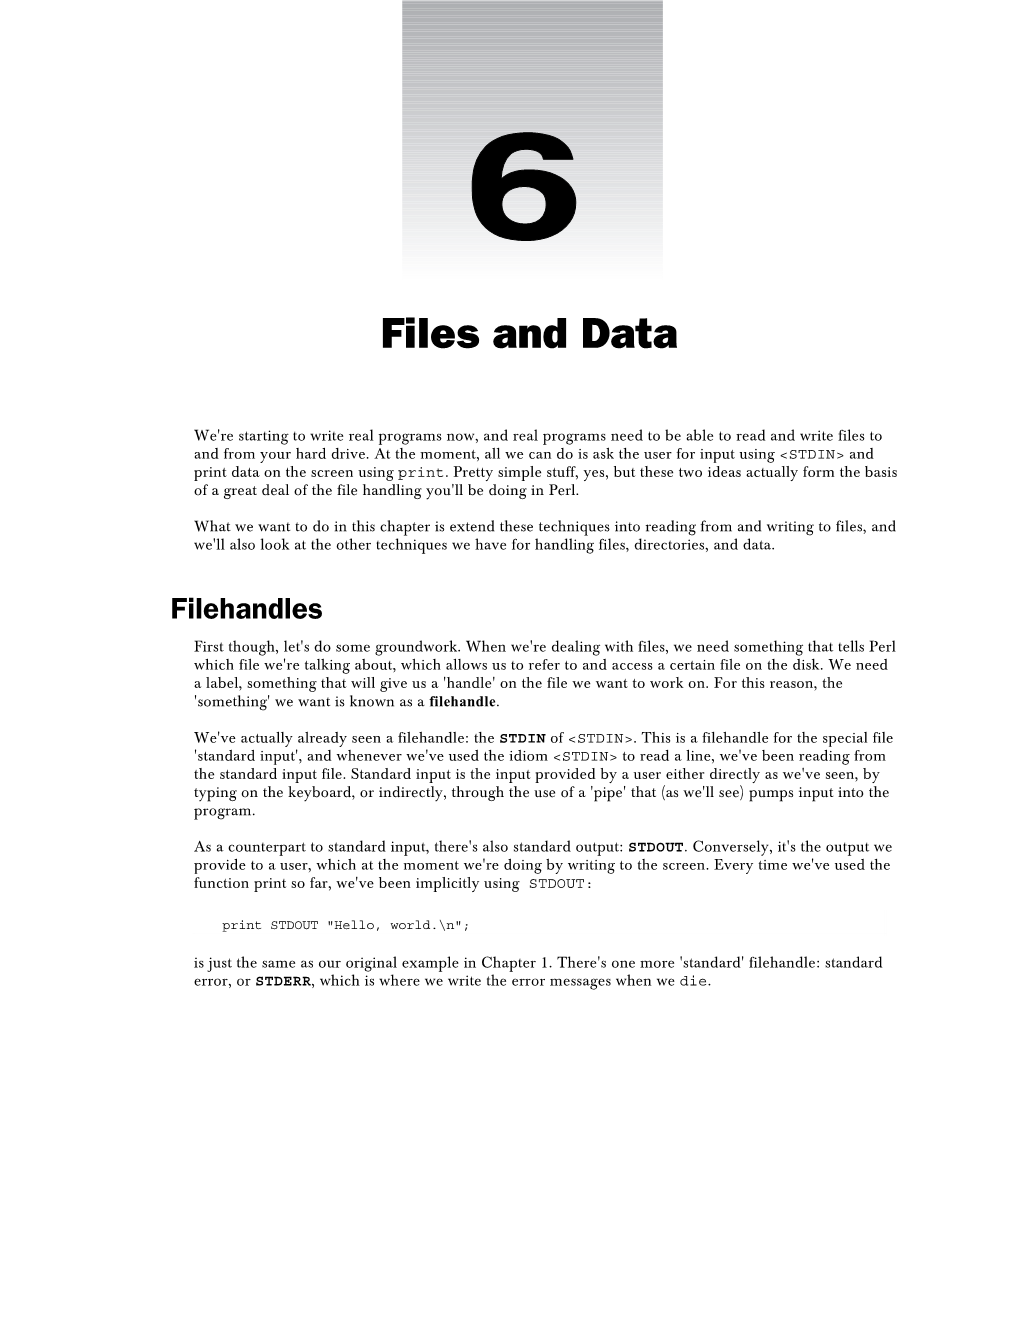 Files and Data